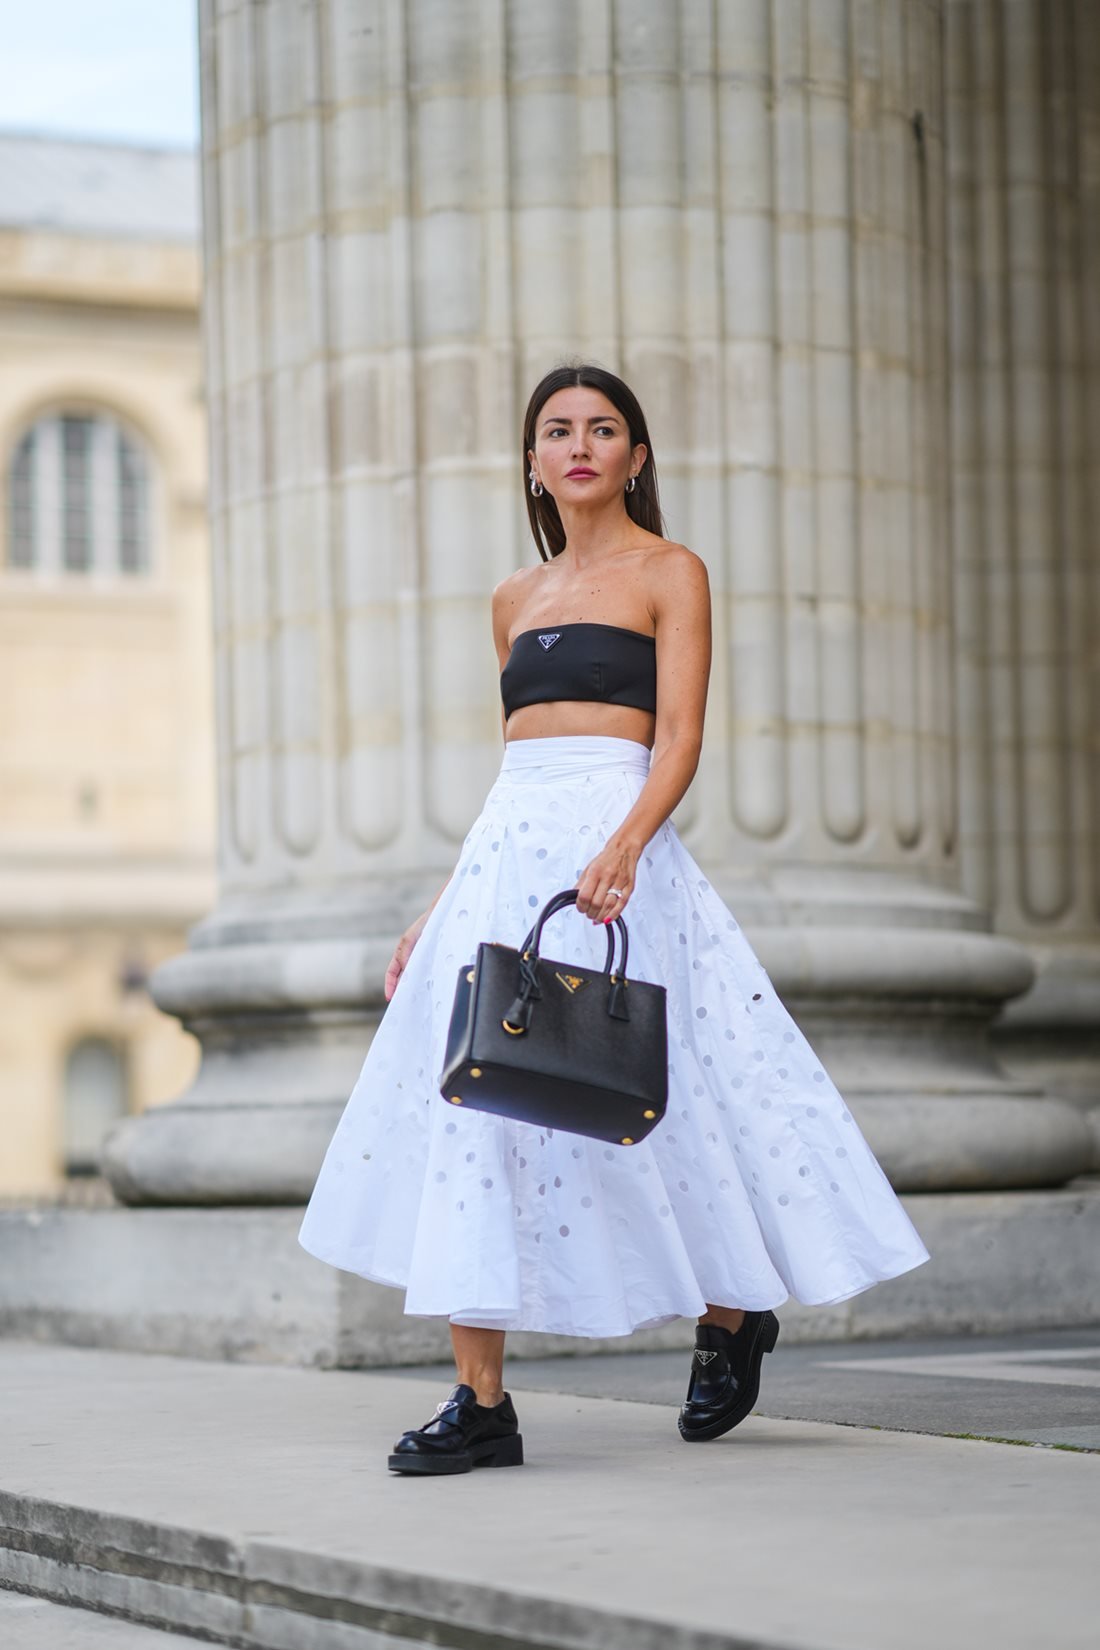 Young Caucasian woman with straight black hair walking down the street and posing for a photo.  She wears a black strapless top, a white skirt, black loafers and a leather bag called Galleria.  All pieces are by Prada.  - Metropolises